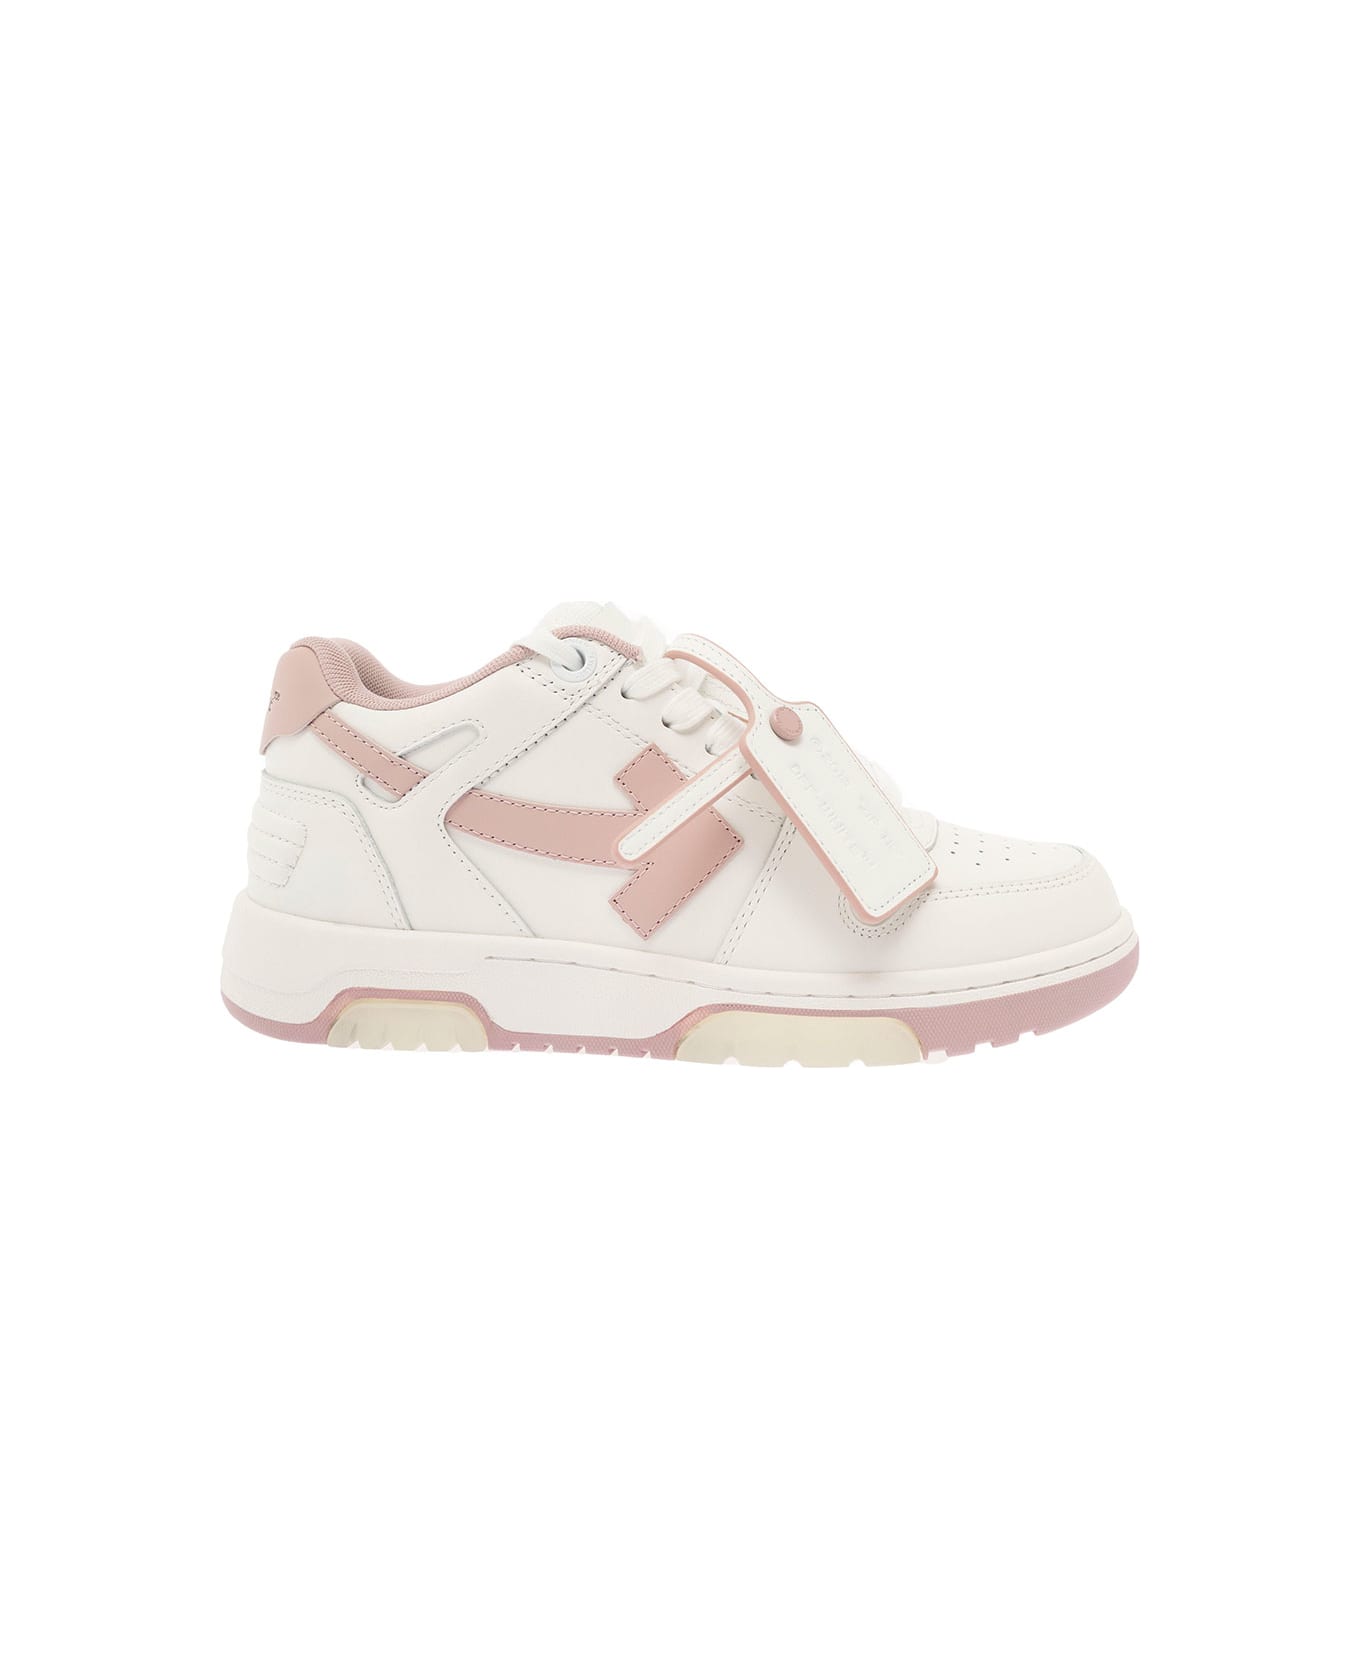 Off-White Out Of Office Calf Leather White Pink - Pink スニーカー